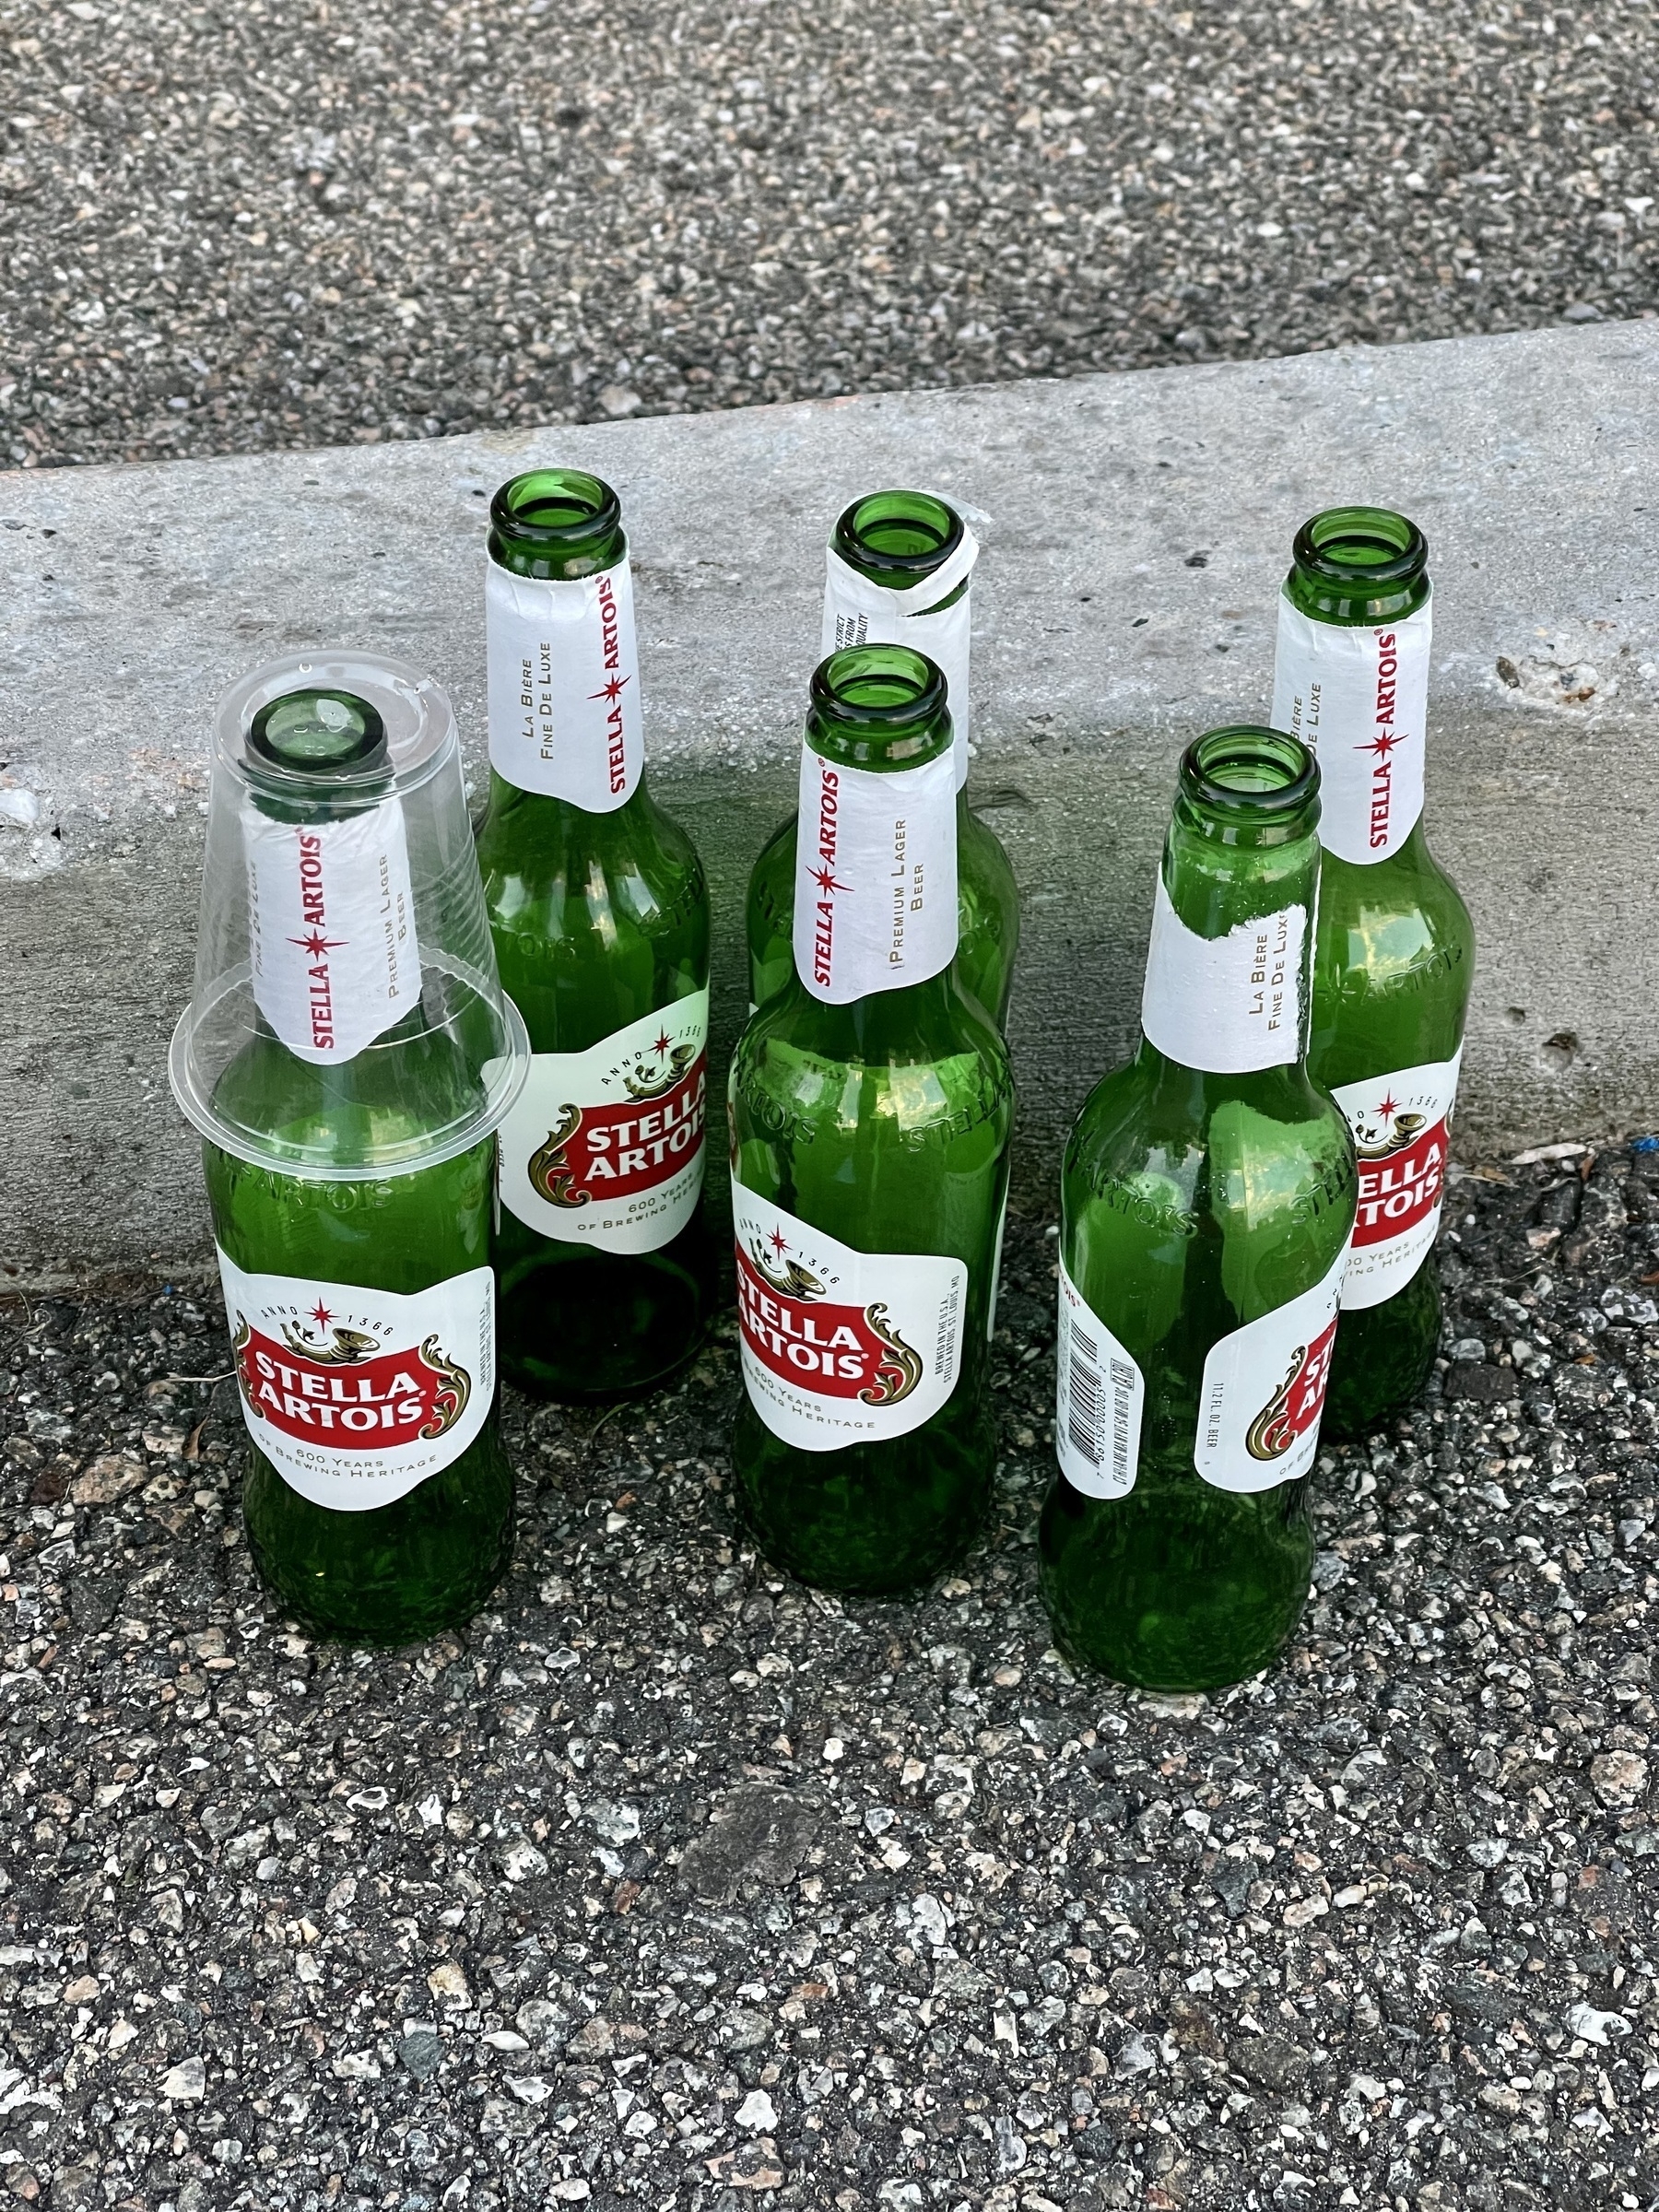 Six empty Stella Artois bottles standing next to a concrete curb in a parking lot. The left most bottle has a plastic cup inverted over it.